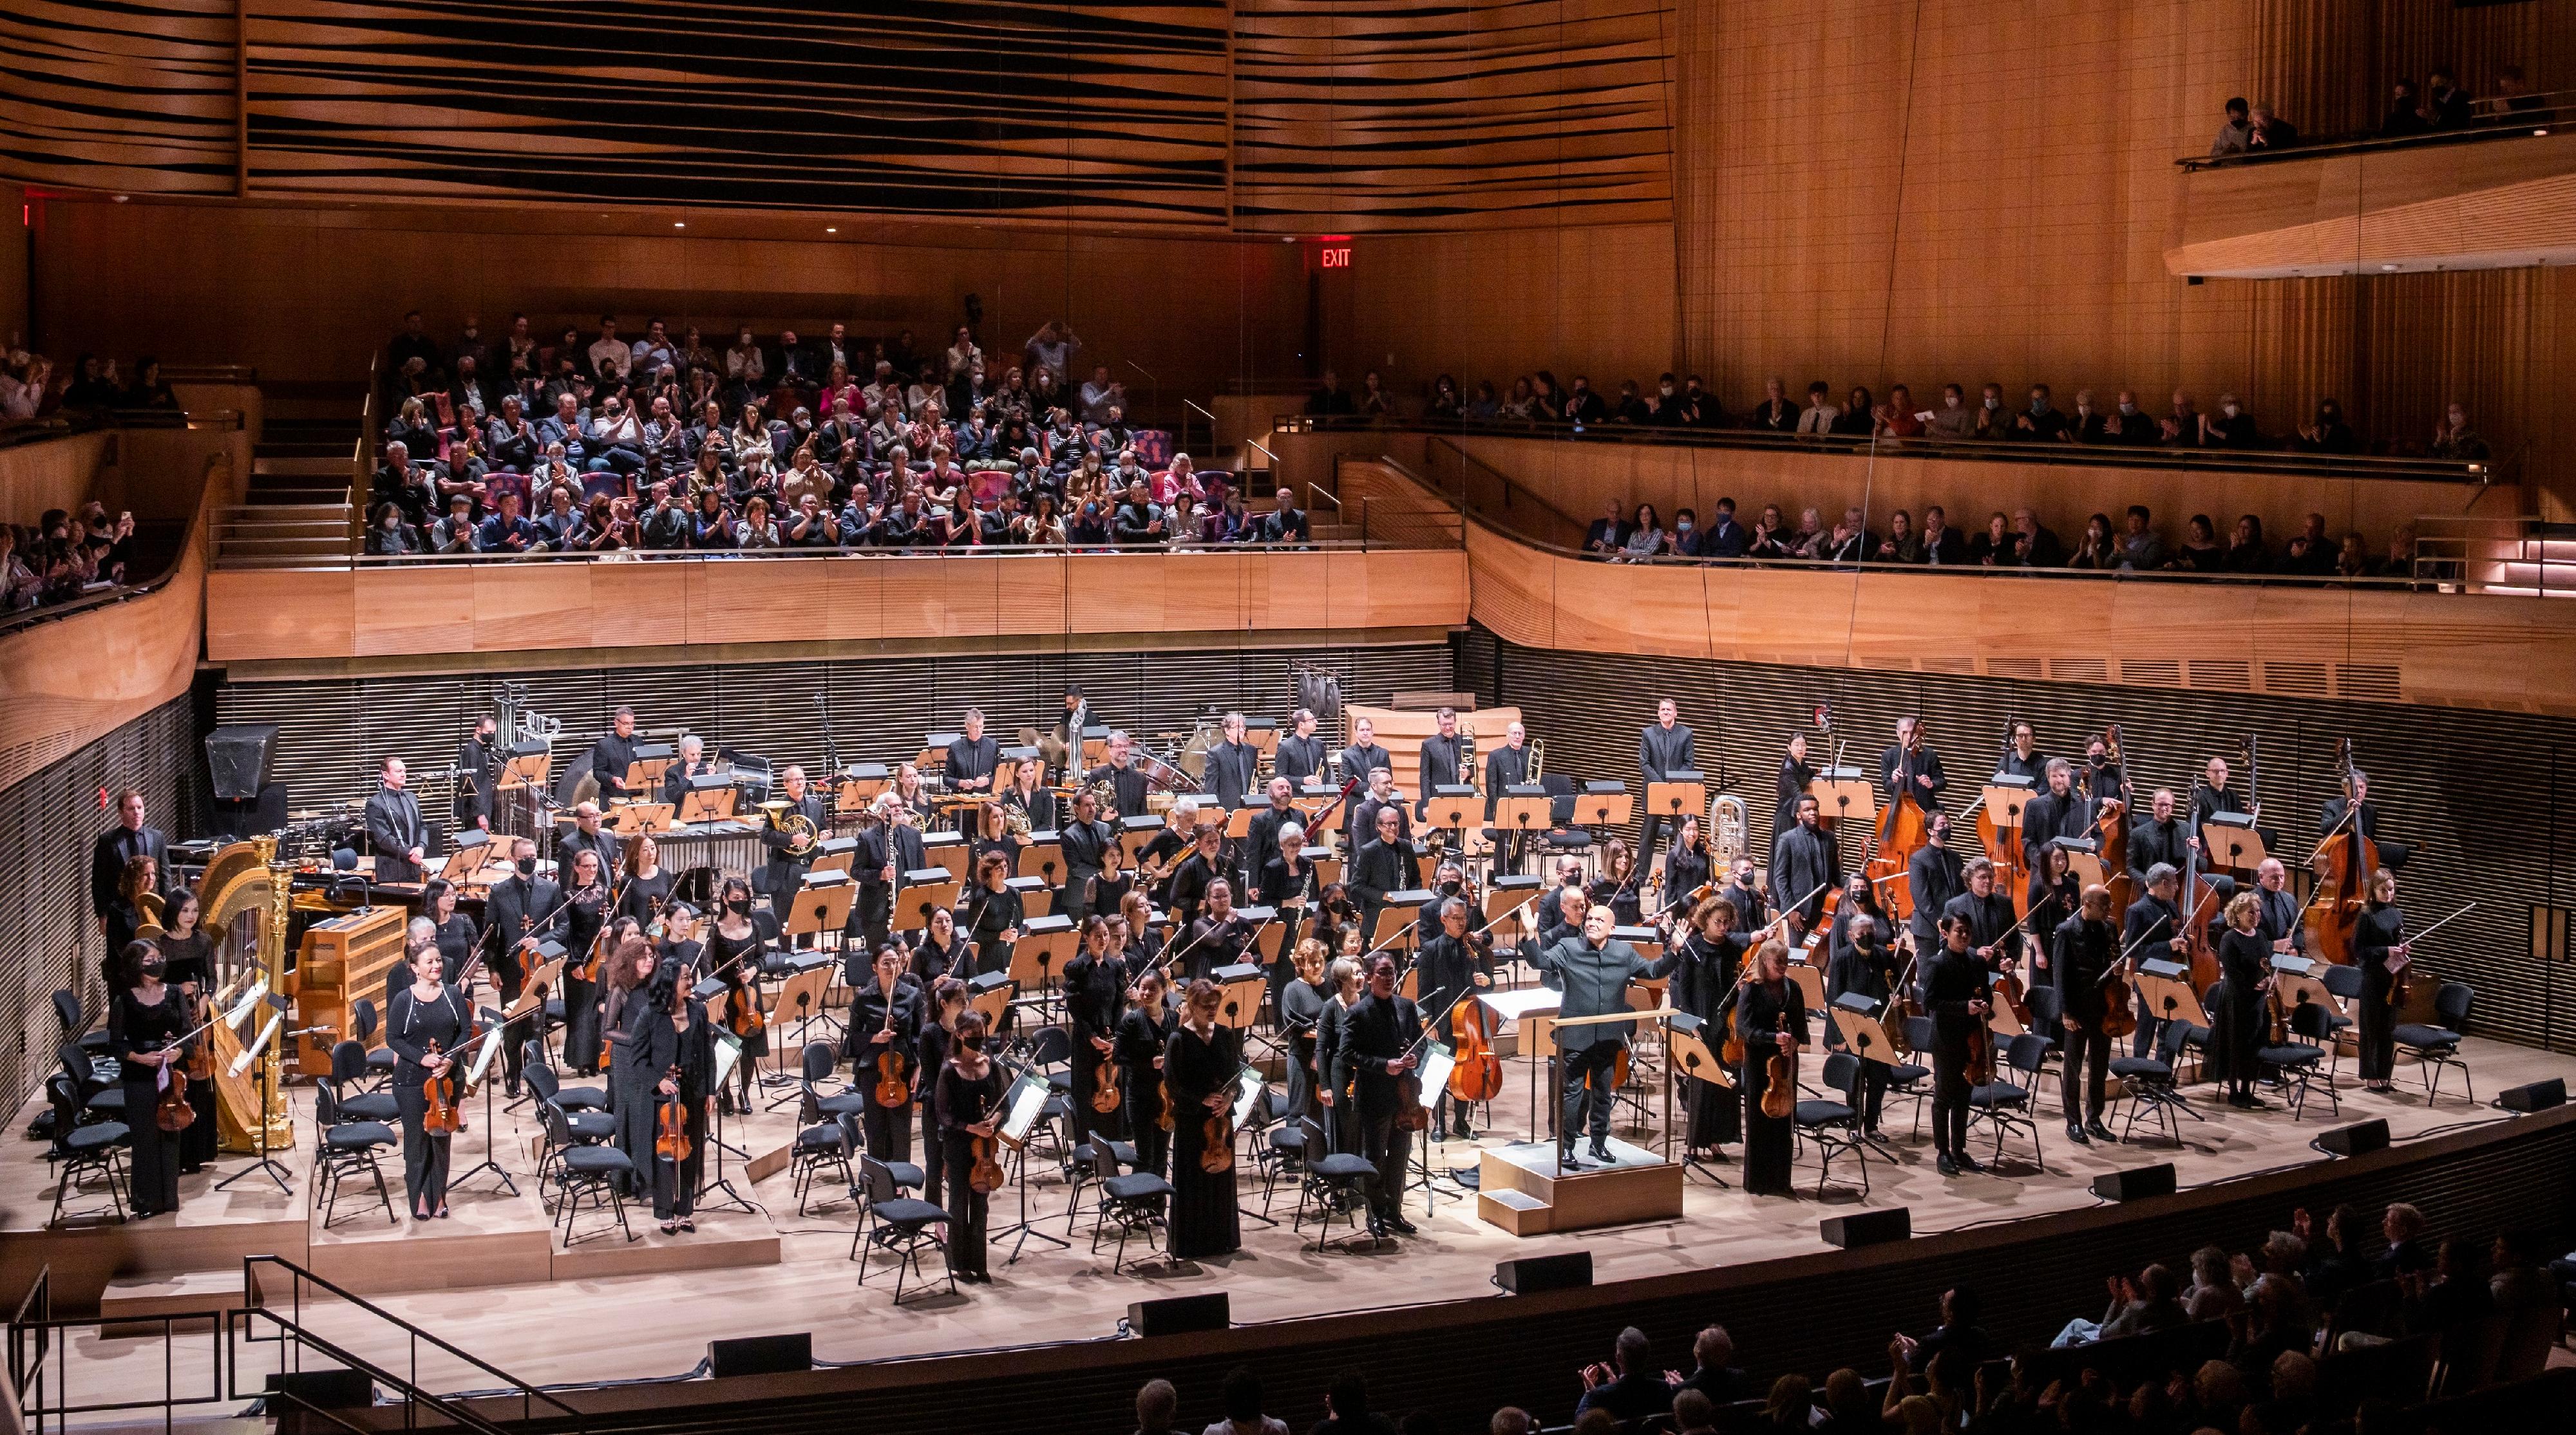 The New York Philharmonic has been invited by the Leisure and Cultural Services Department to stage two concerts on July 4 and 5 (Tuesday and Wednesday). Photo shows the New York Philharmonic and its Music Director Jaap van Zweden. (Source of photo: Chris Lee)